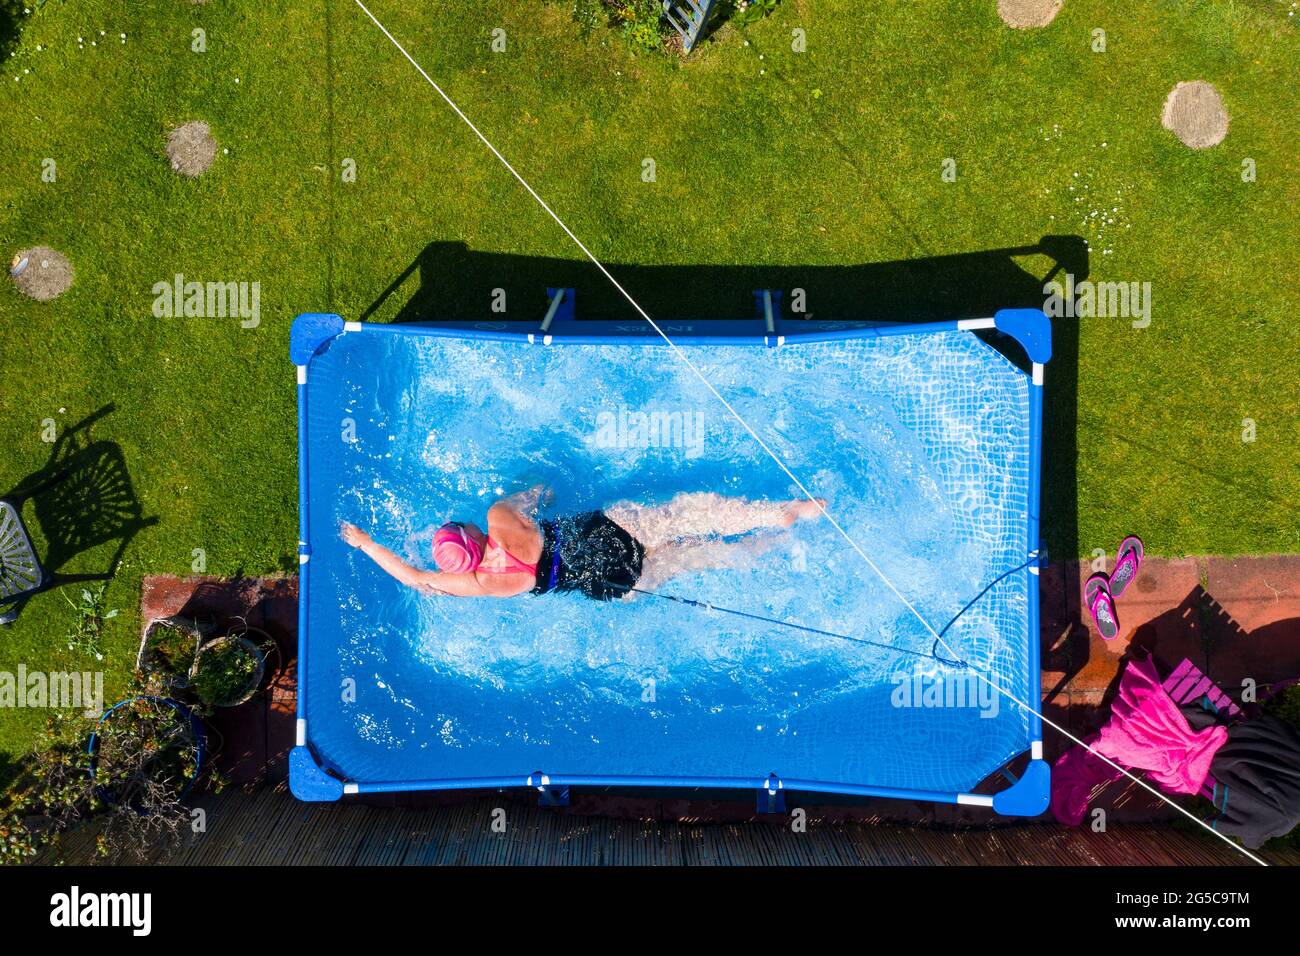 Fiona Philp  from Limekilns, Fife, a wild open water swimmer , during a daily swim in pool in garden, Limekilns, Scotland, UK Stock Photo